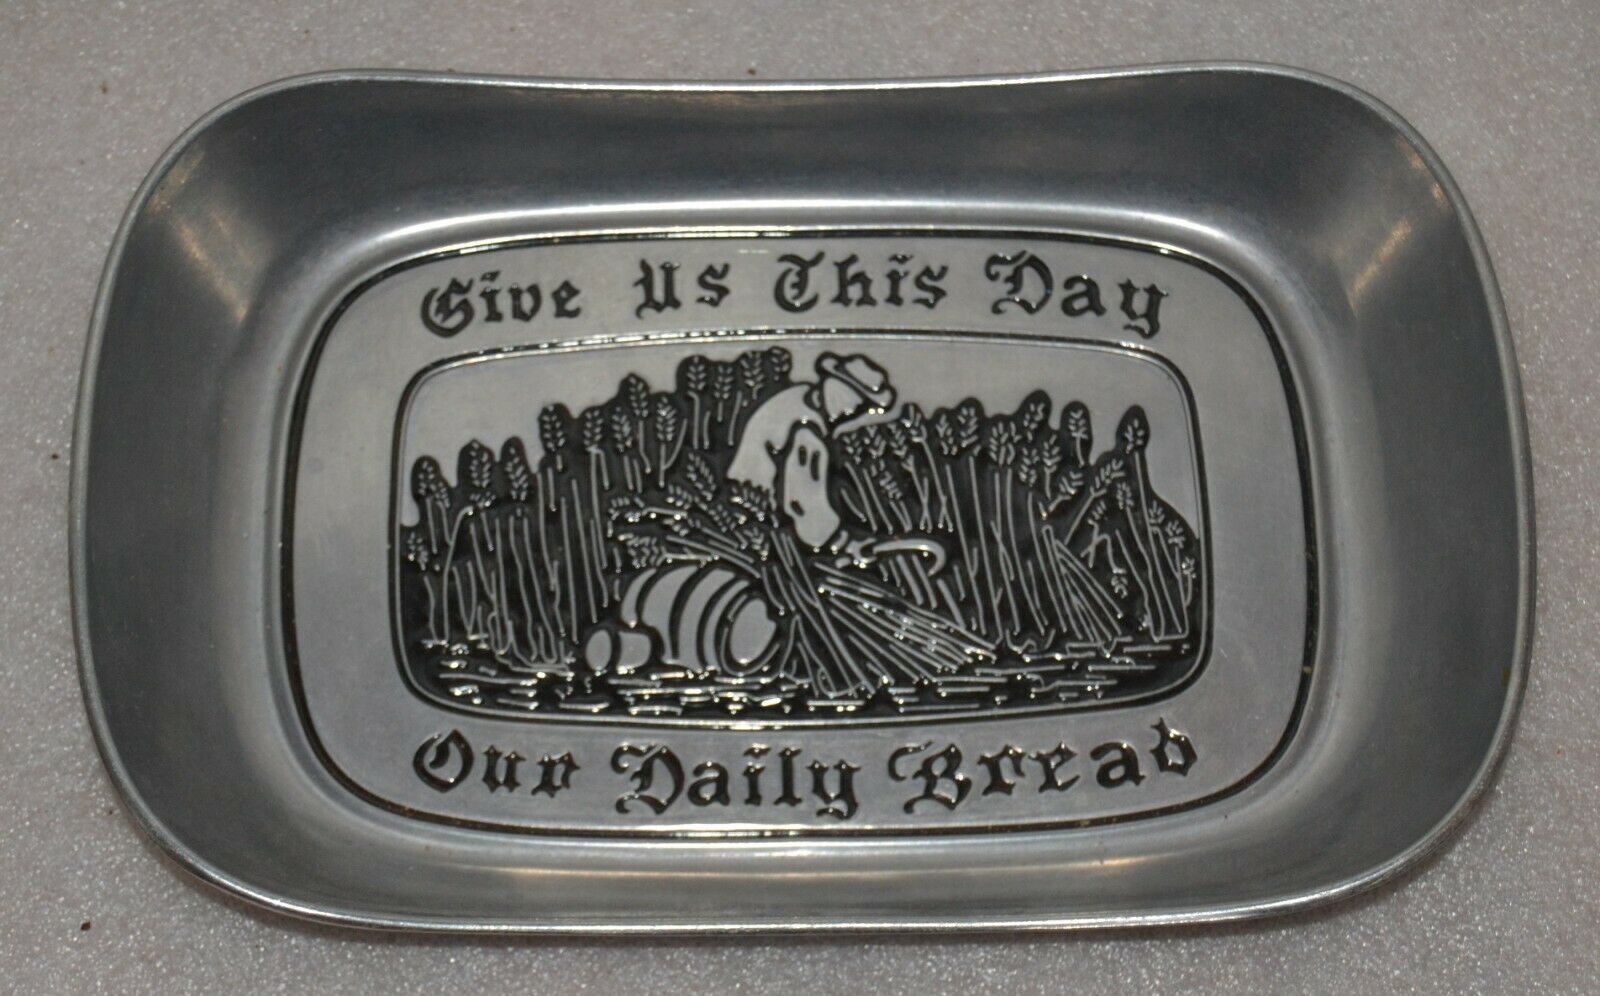 Primary image for Wilton Armetale Elegant Pewter Bread Tray "GIVE US THIS DAY OUR DAILY BREAD"